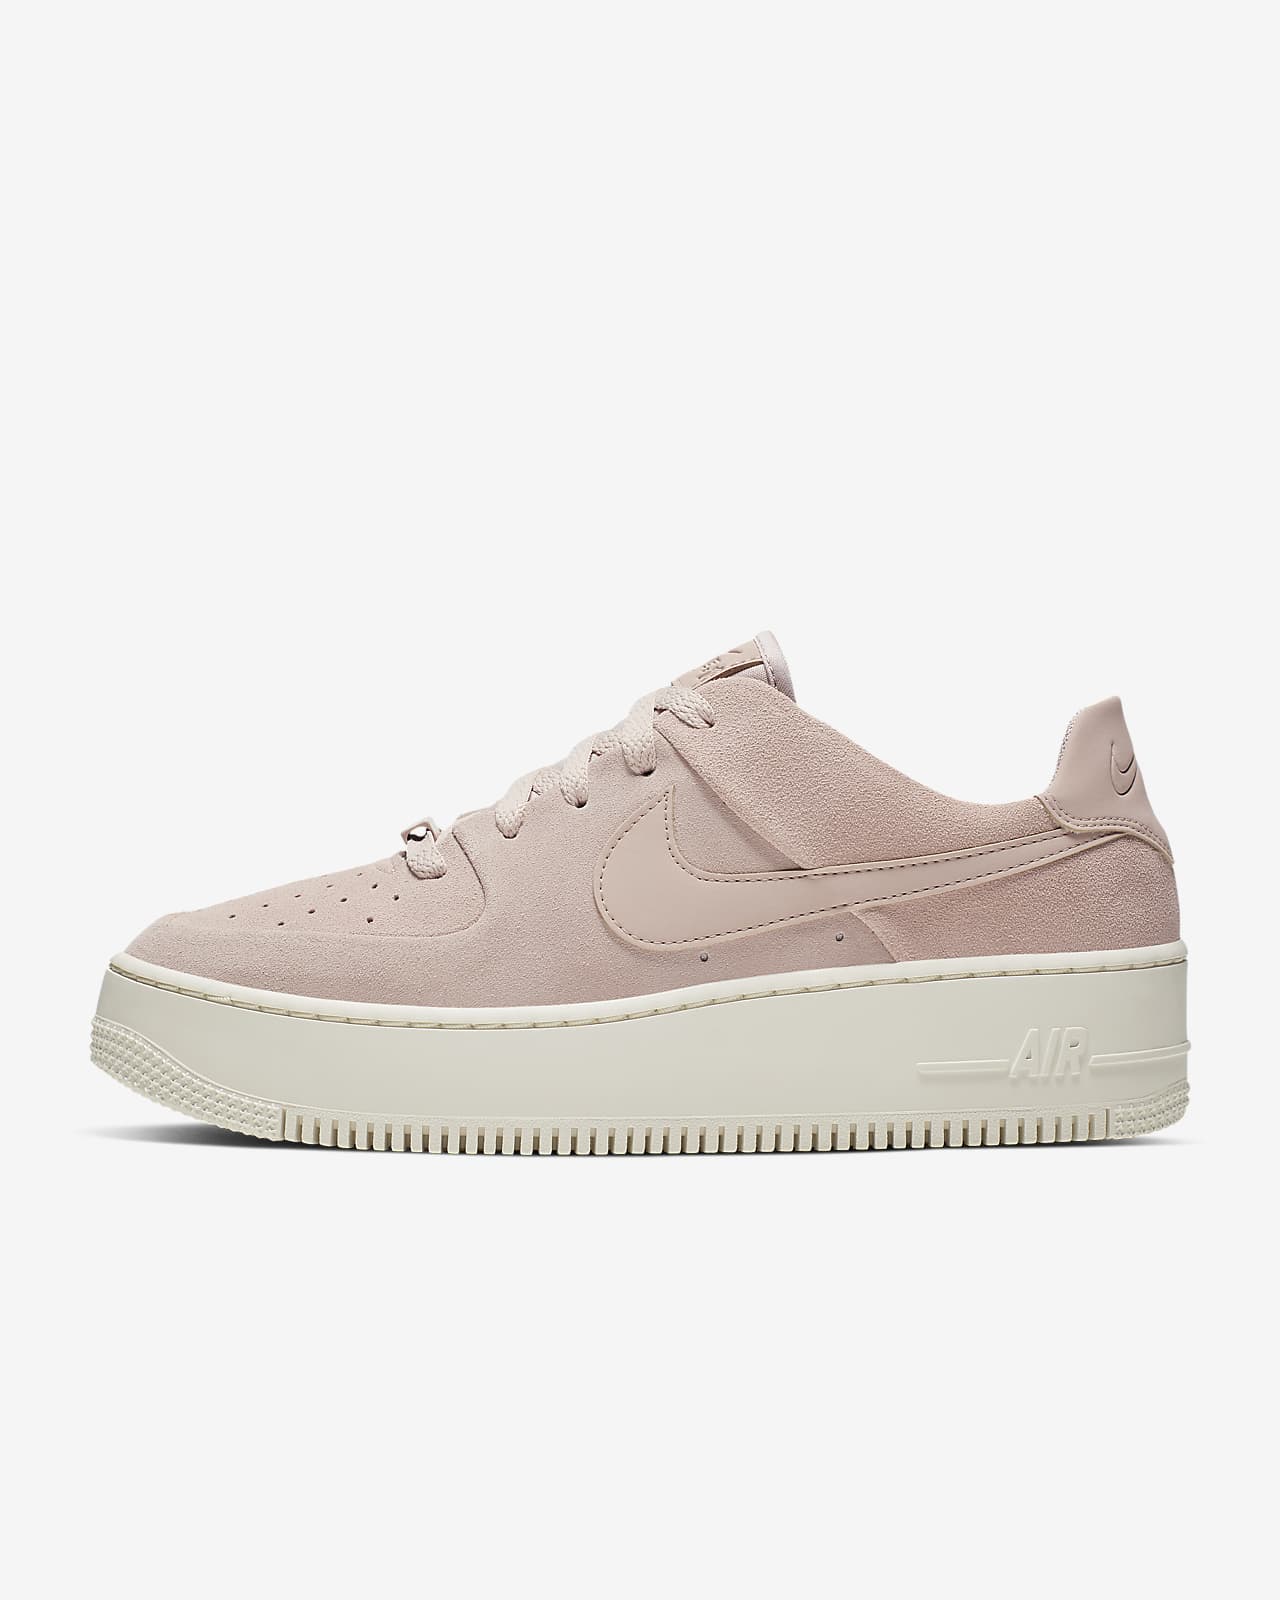 suede nikes womens